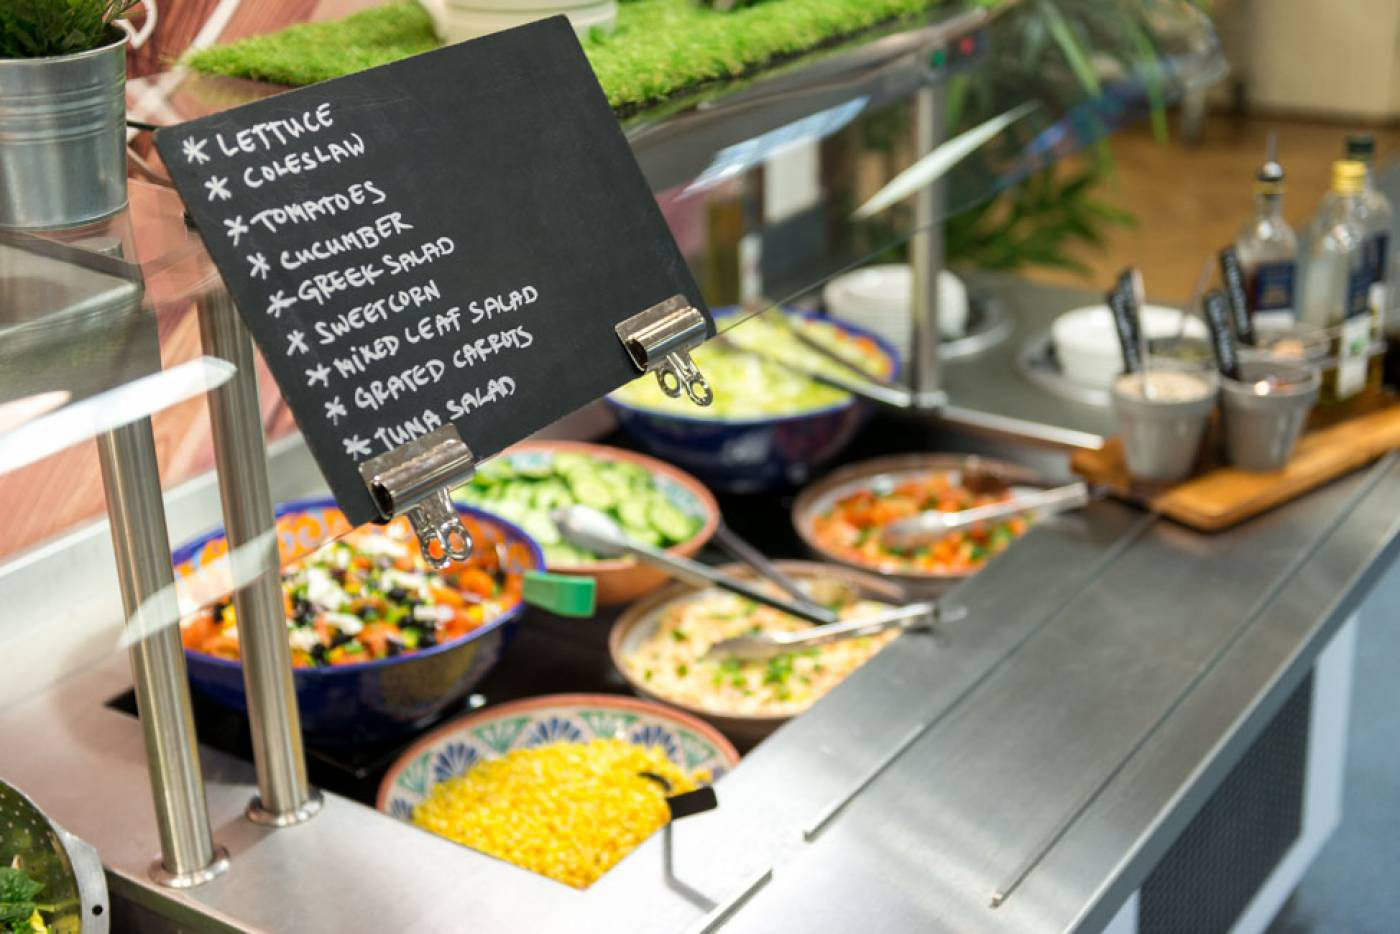 Meal options at UCL catered student accommodation.